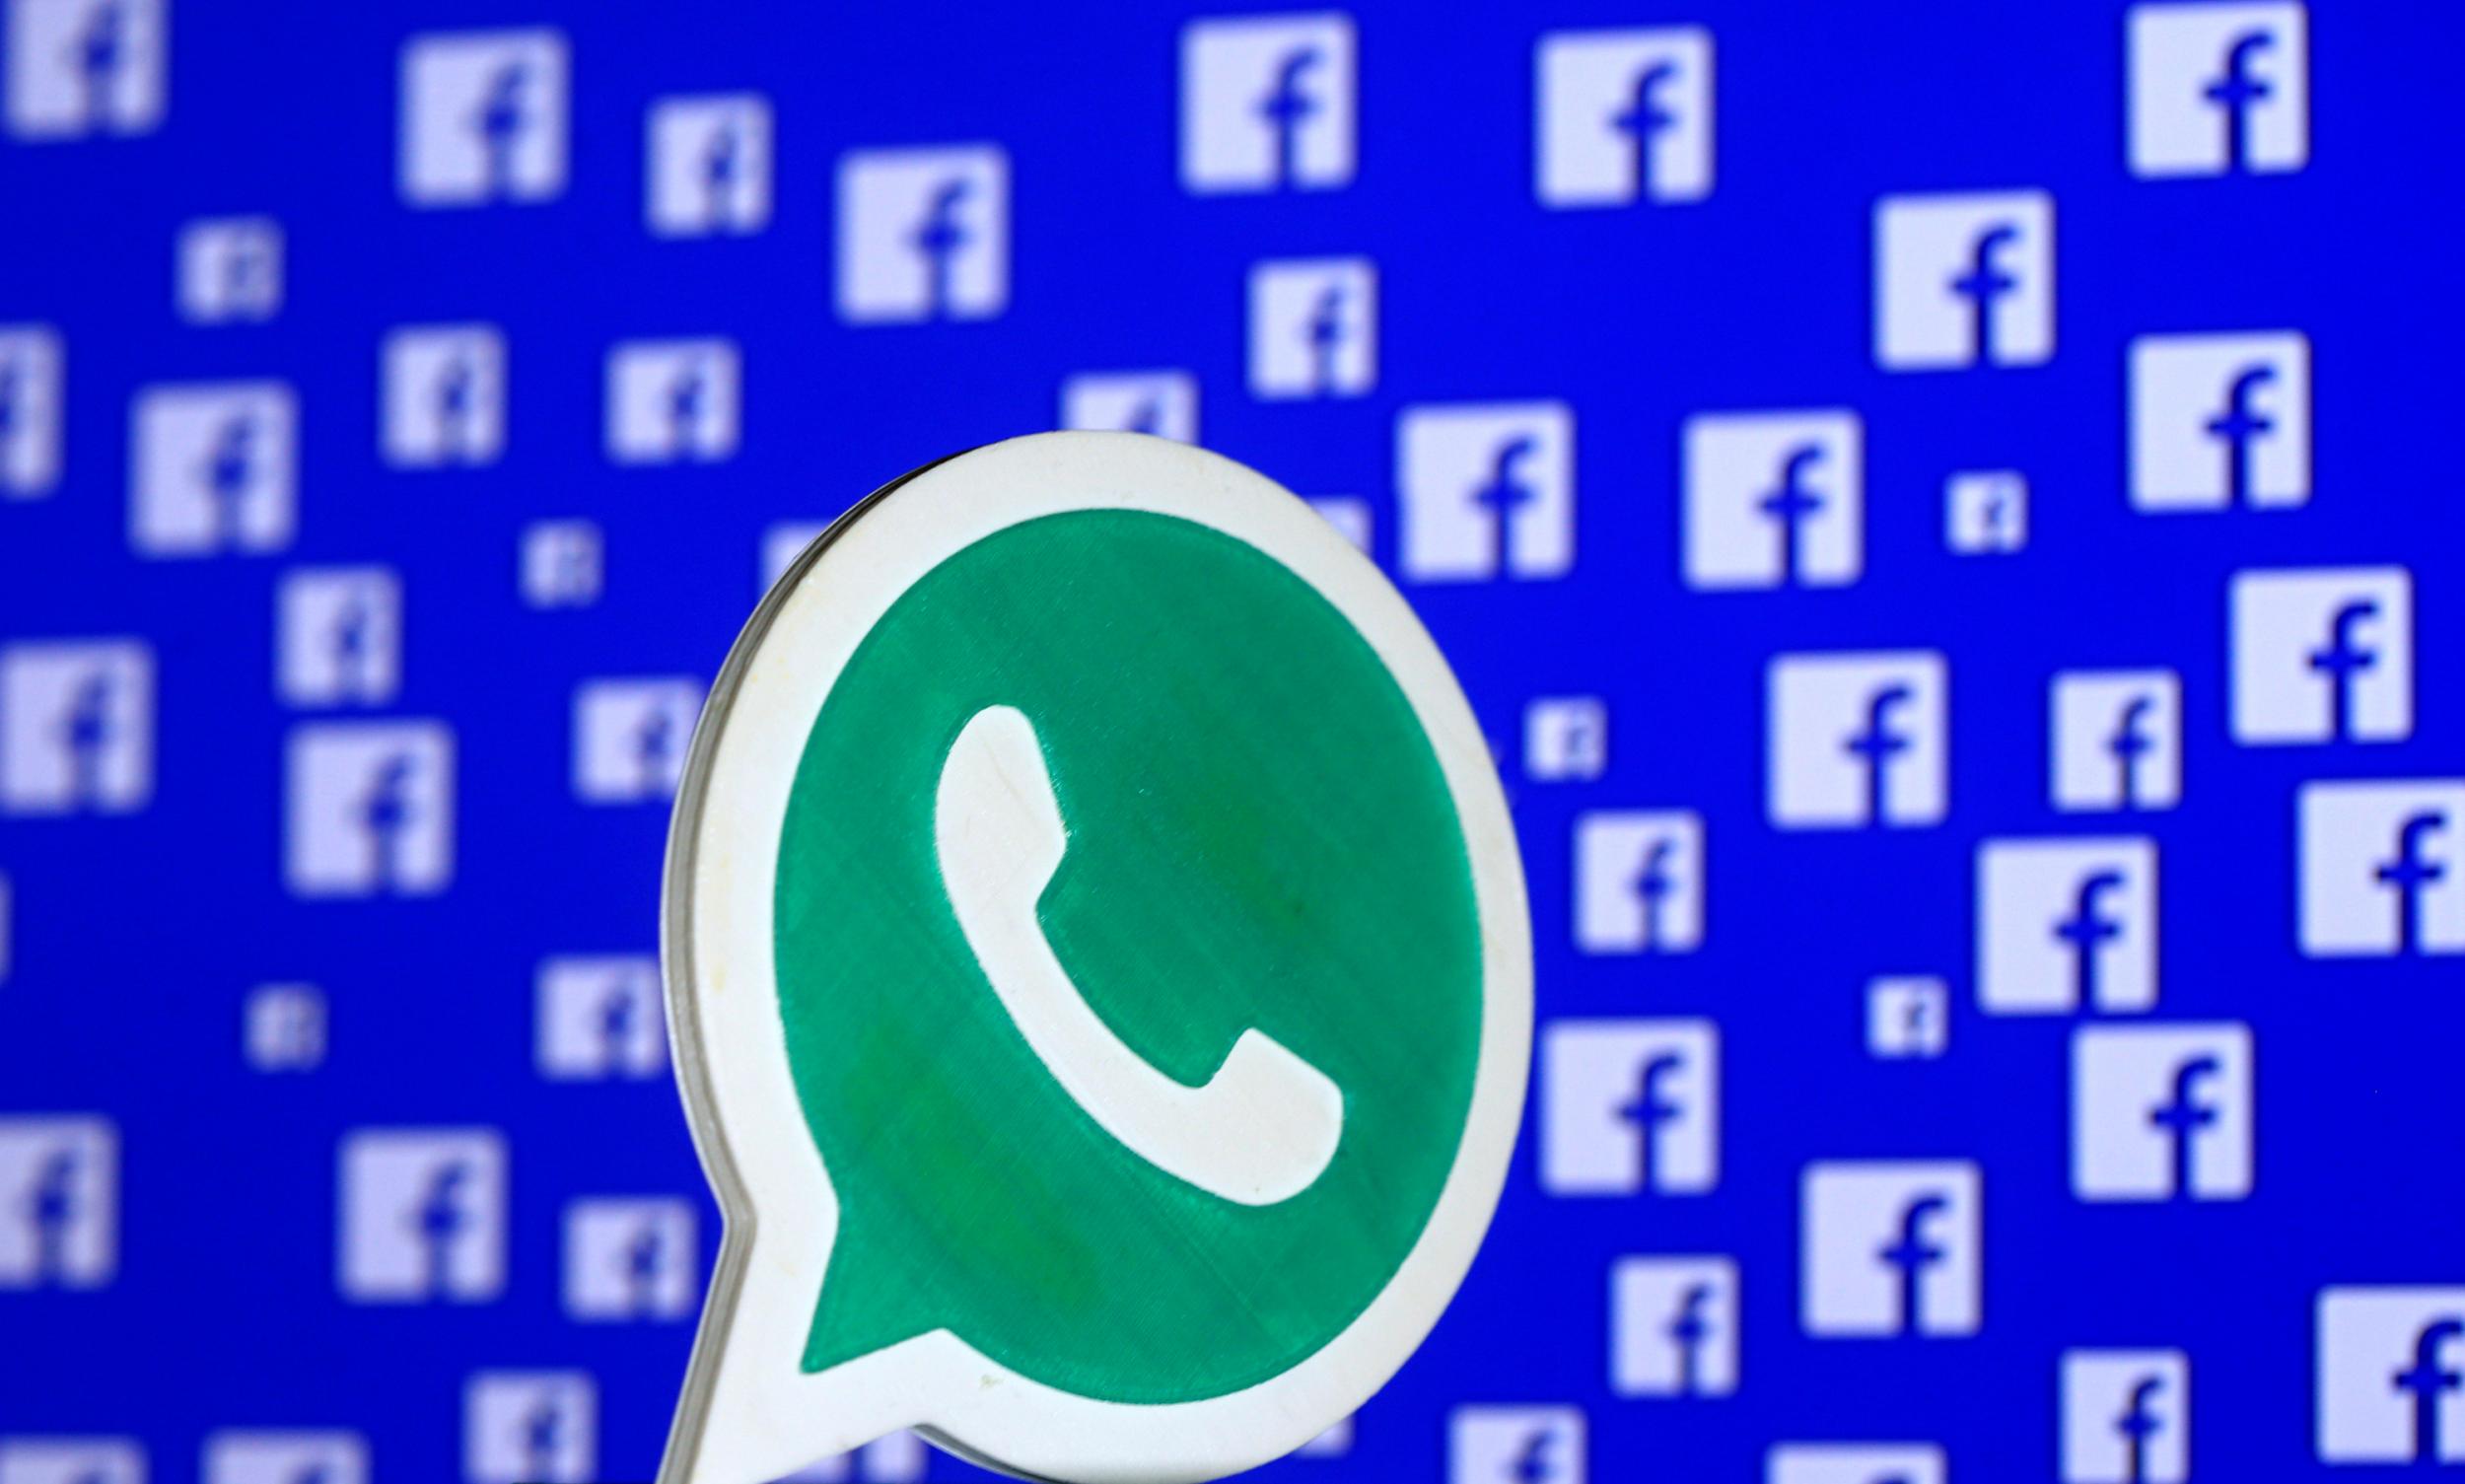 Facebook bought WhatsApp for $22 billion in 2014, promising not to introduce ads for at least five years